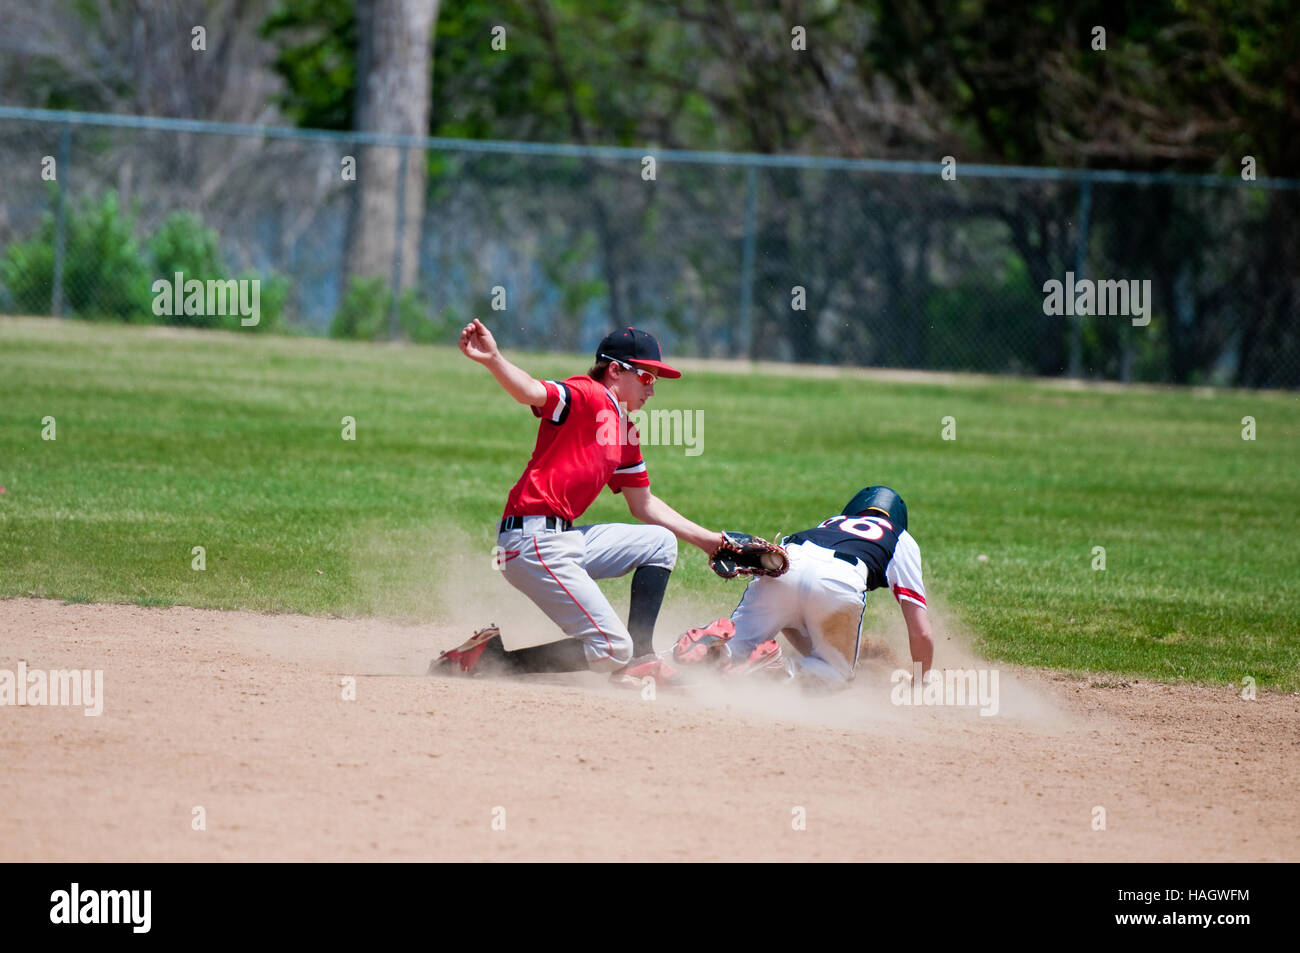 Baseball shortstop tagging out a player sliding at second base. Stock Photo